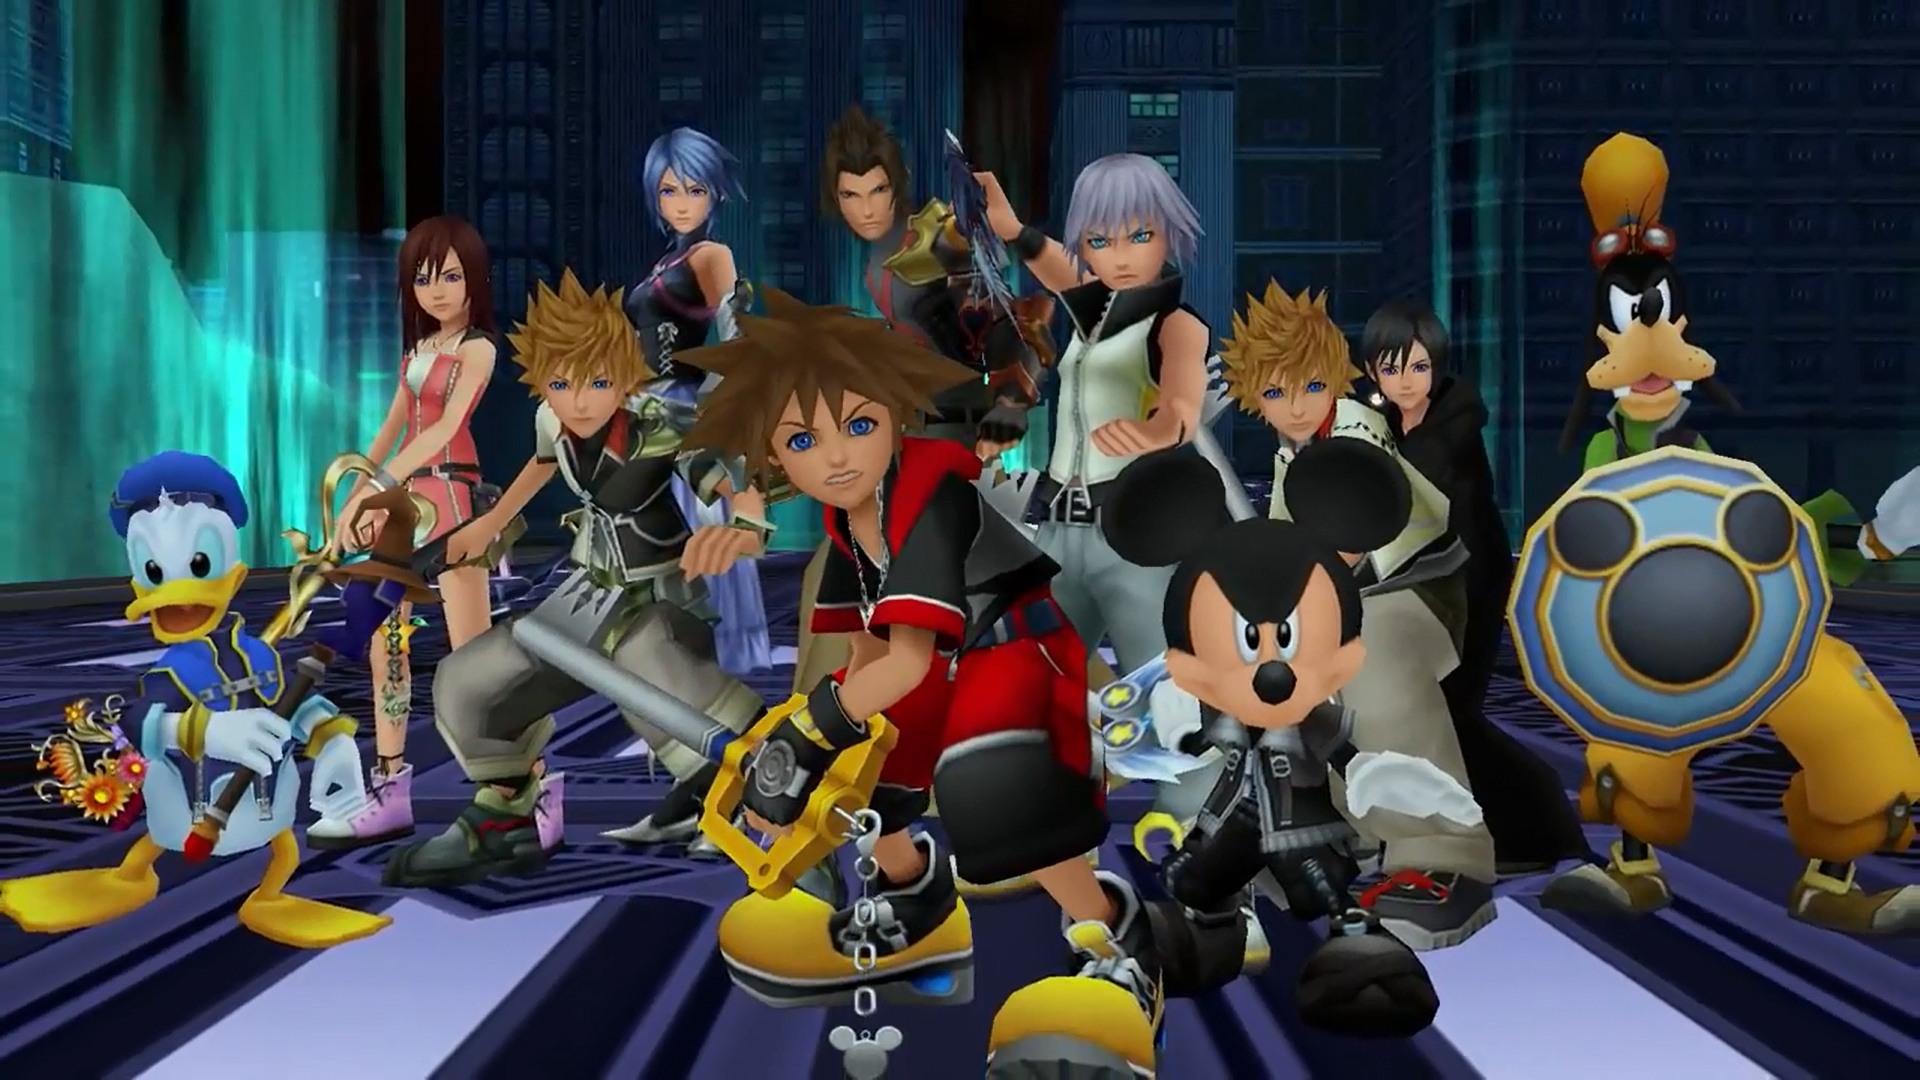 Kingdom Hearts Backgrounds on Wallpapers Vista